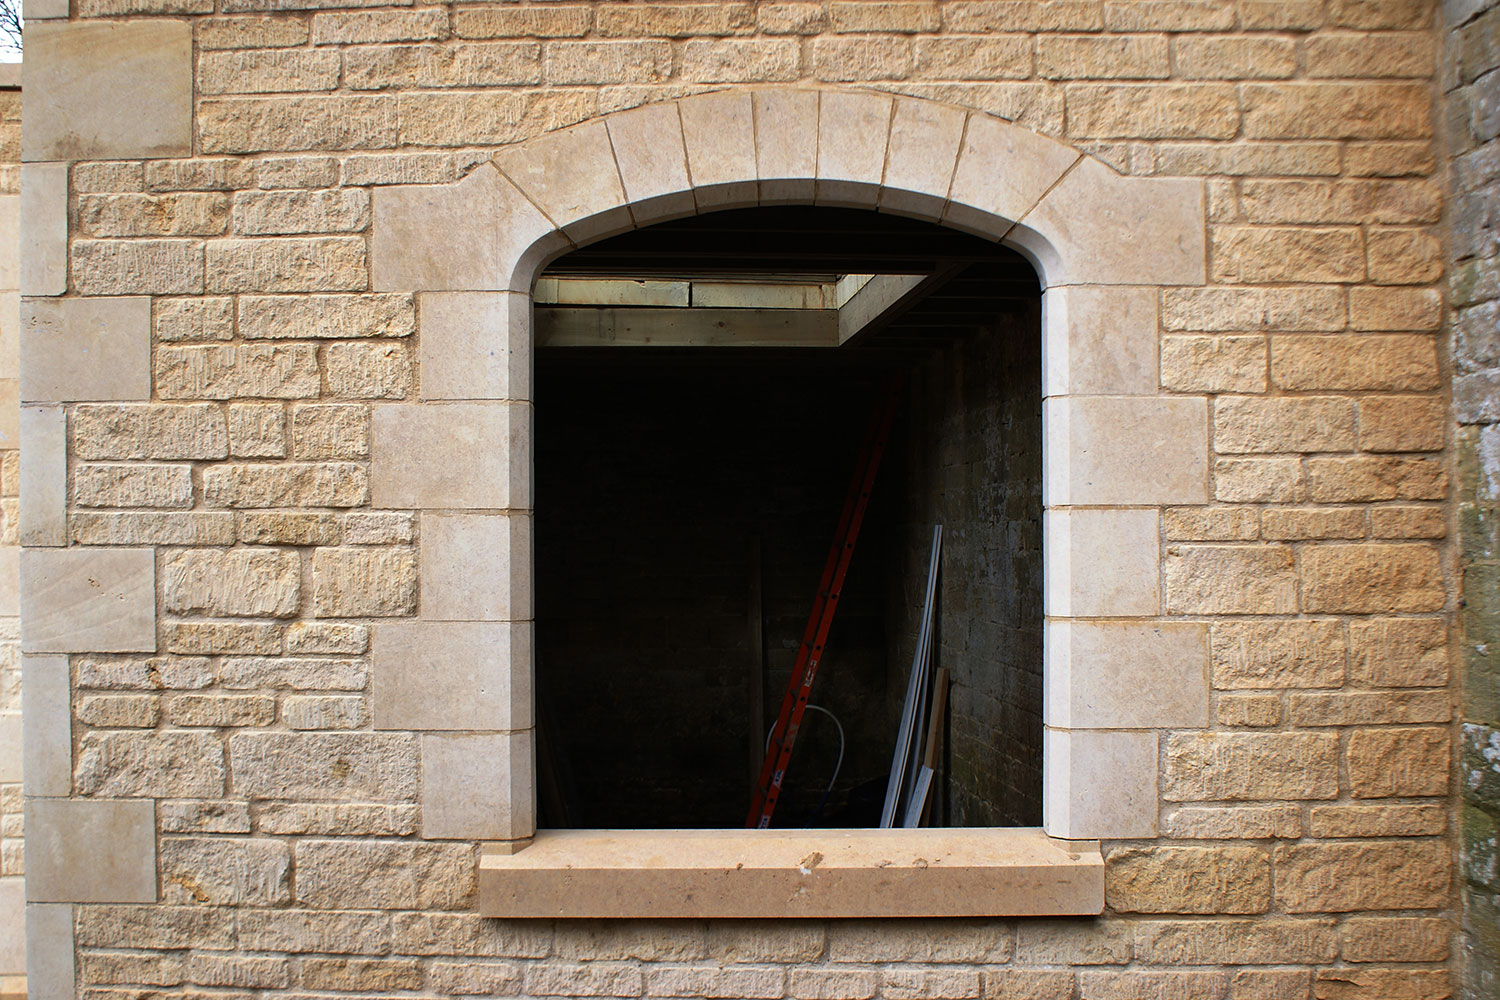 View of a stone window frame